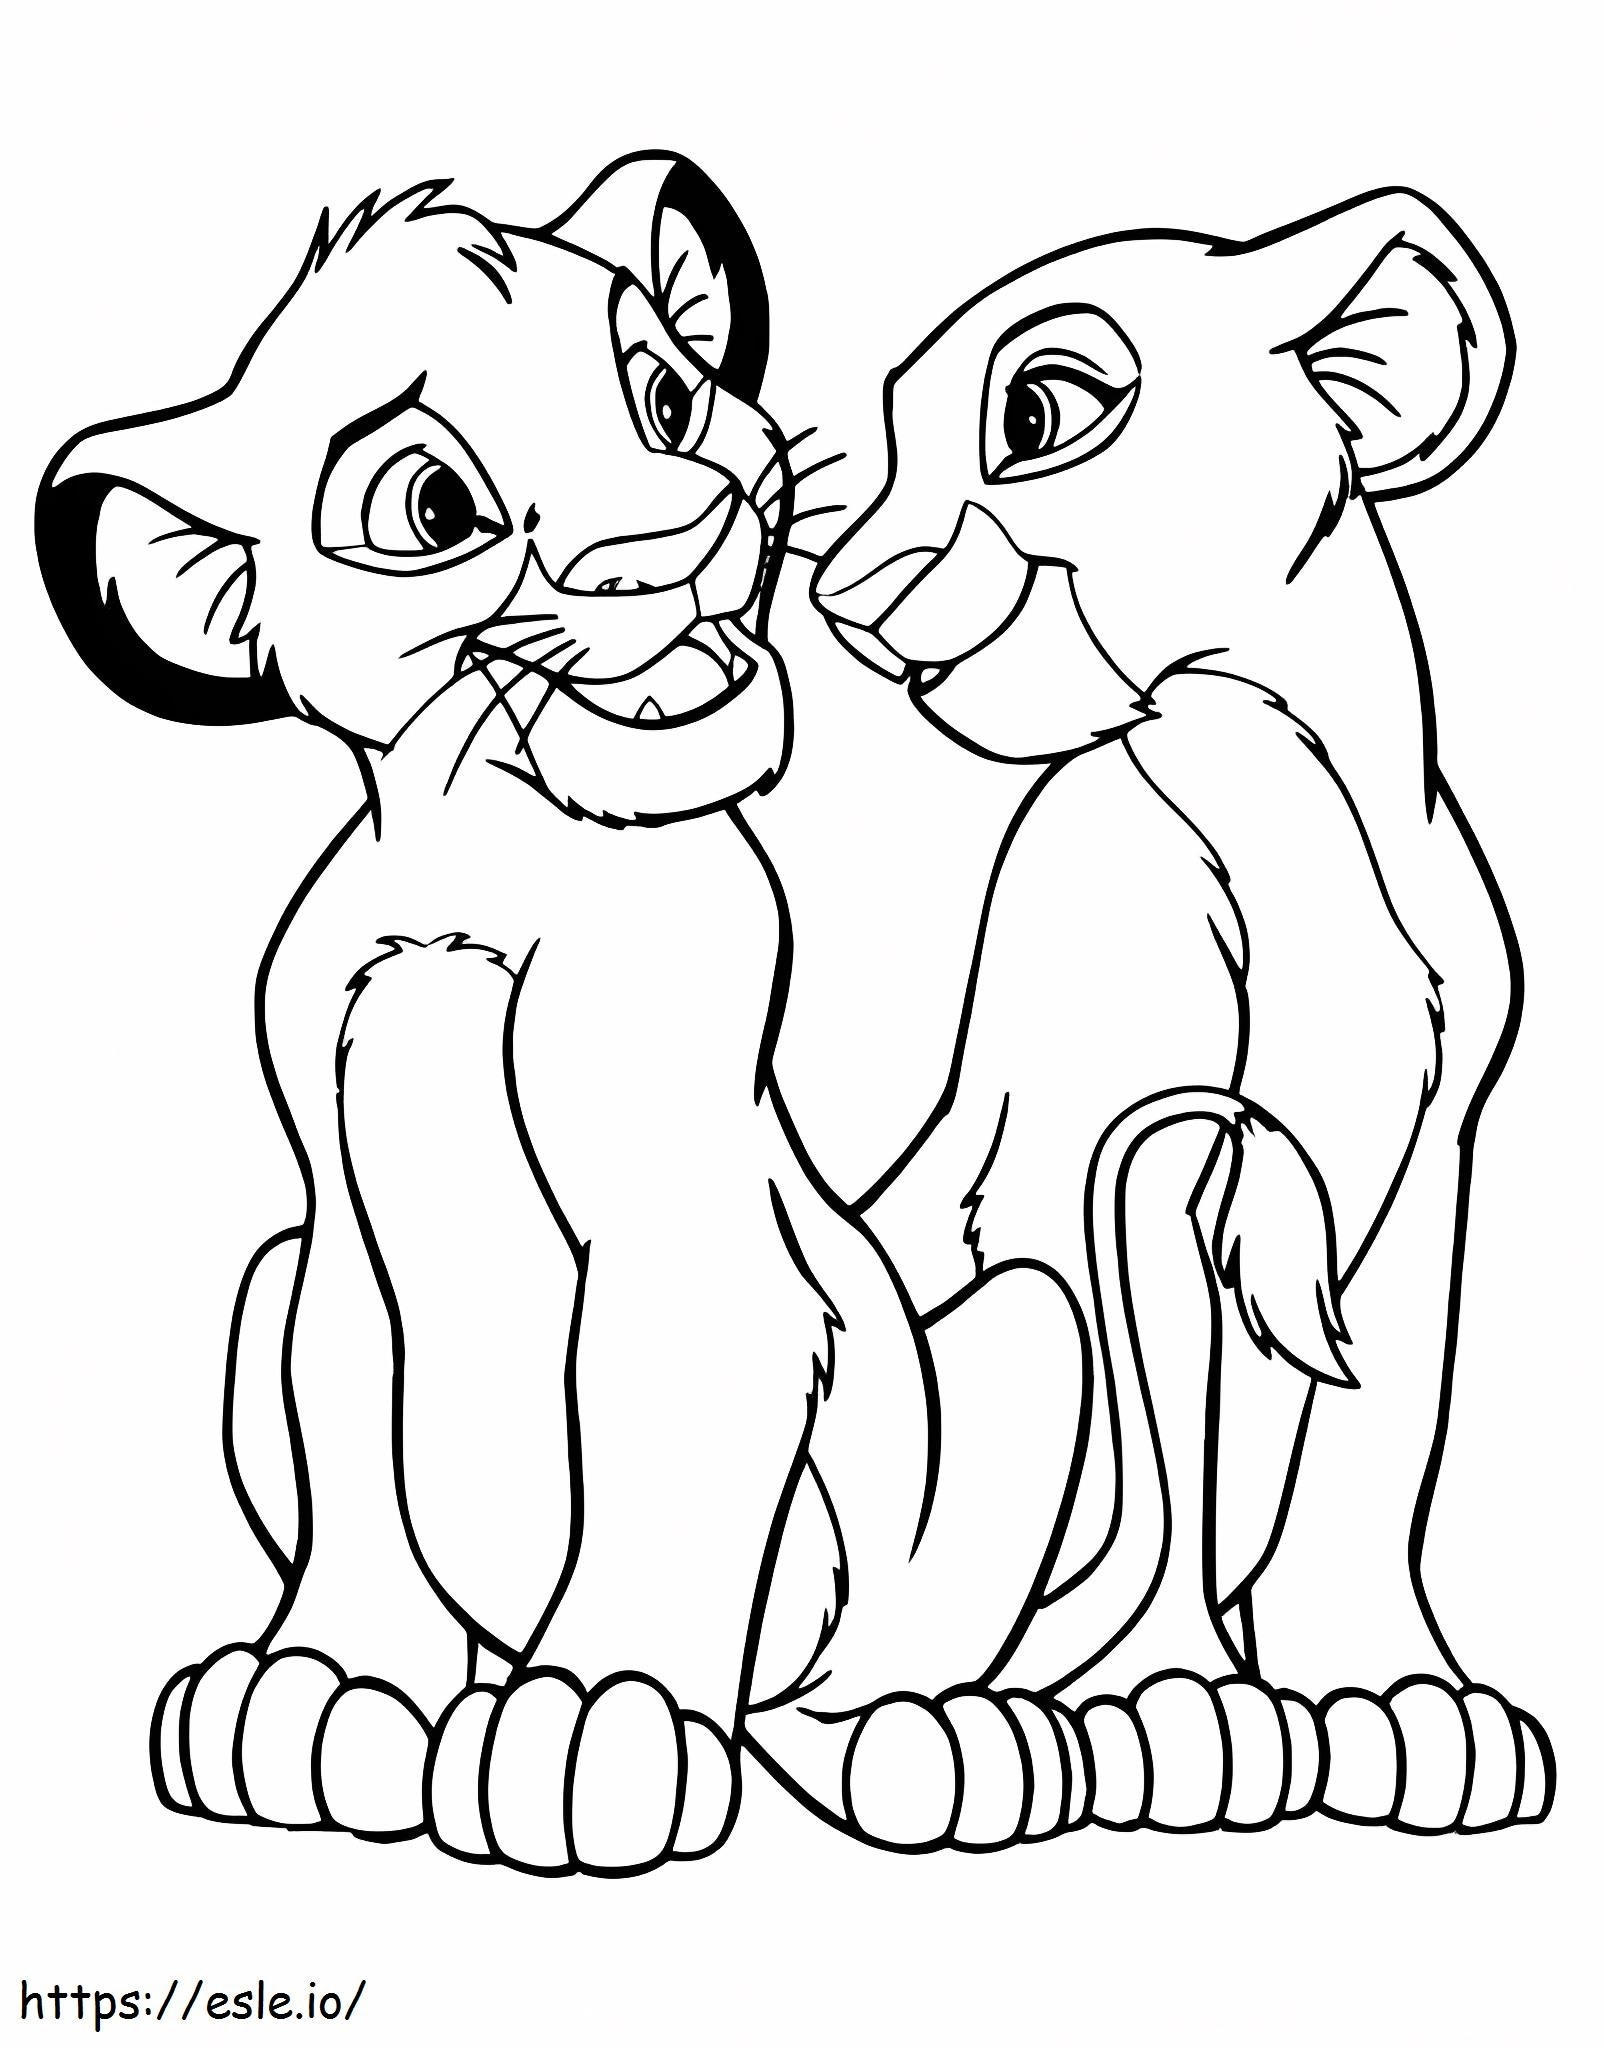 Simba And Girlfriend Couple coloring page